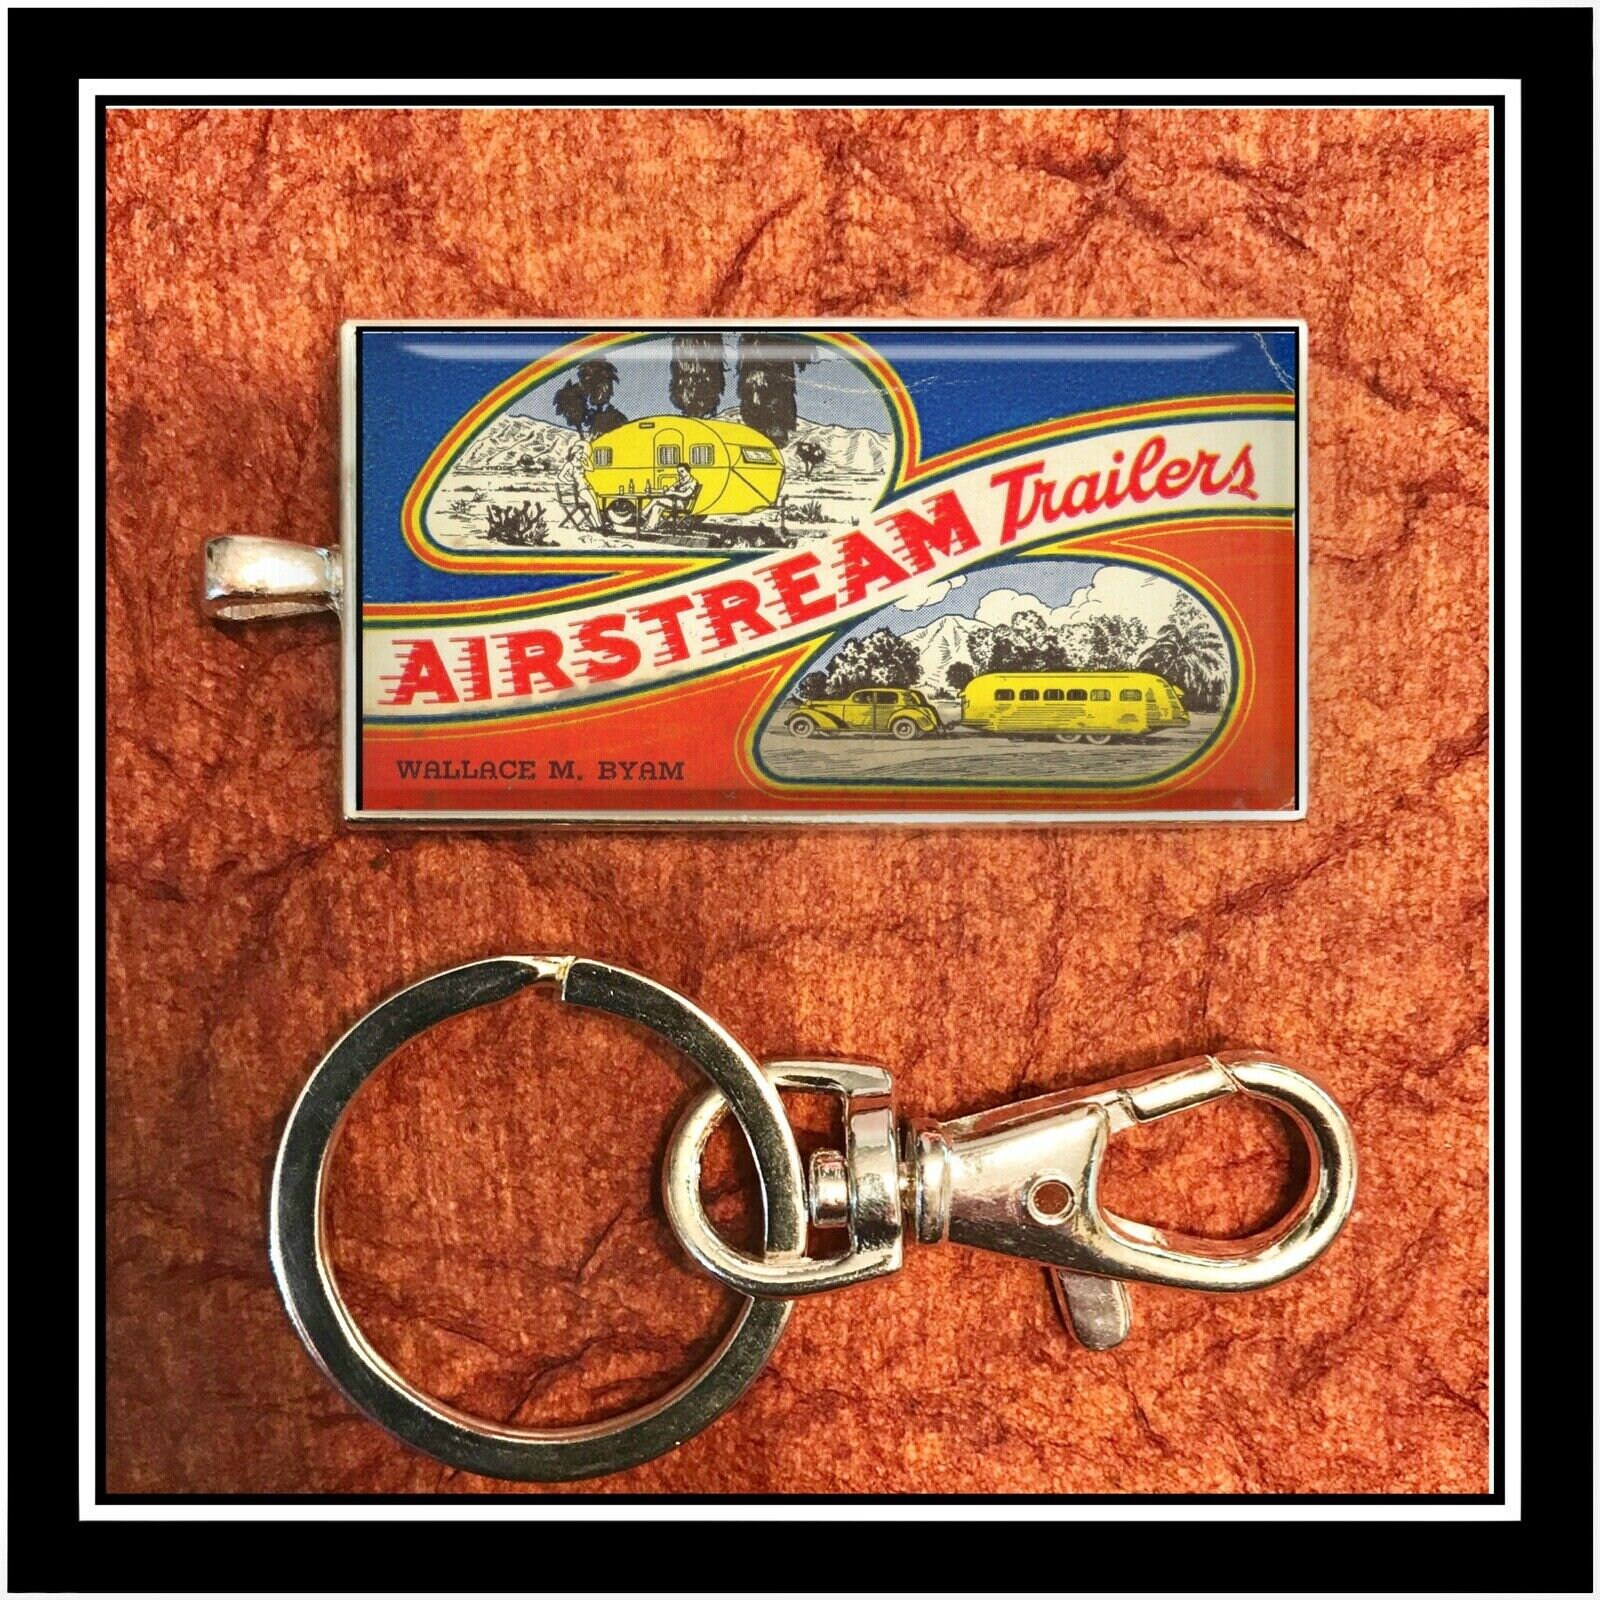 Details about   Vintage Airstream Travel Trailer Decal Photo Keychain Key Chain Pendant Gift 